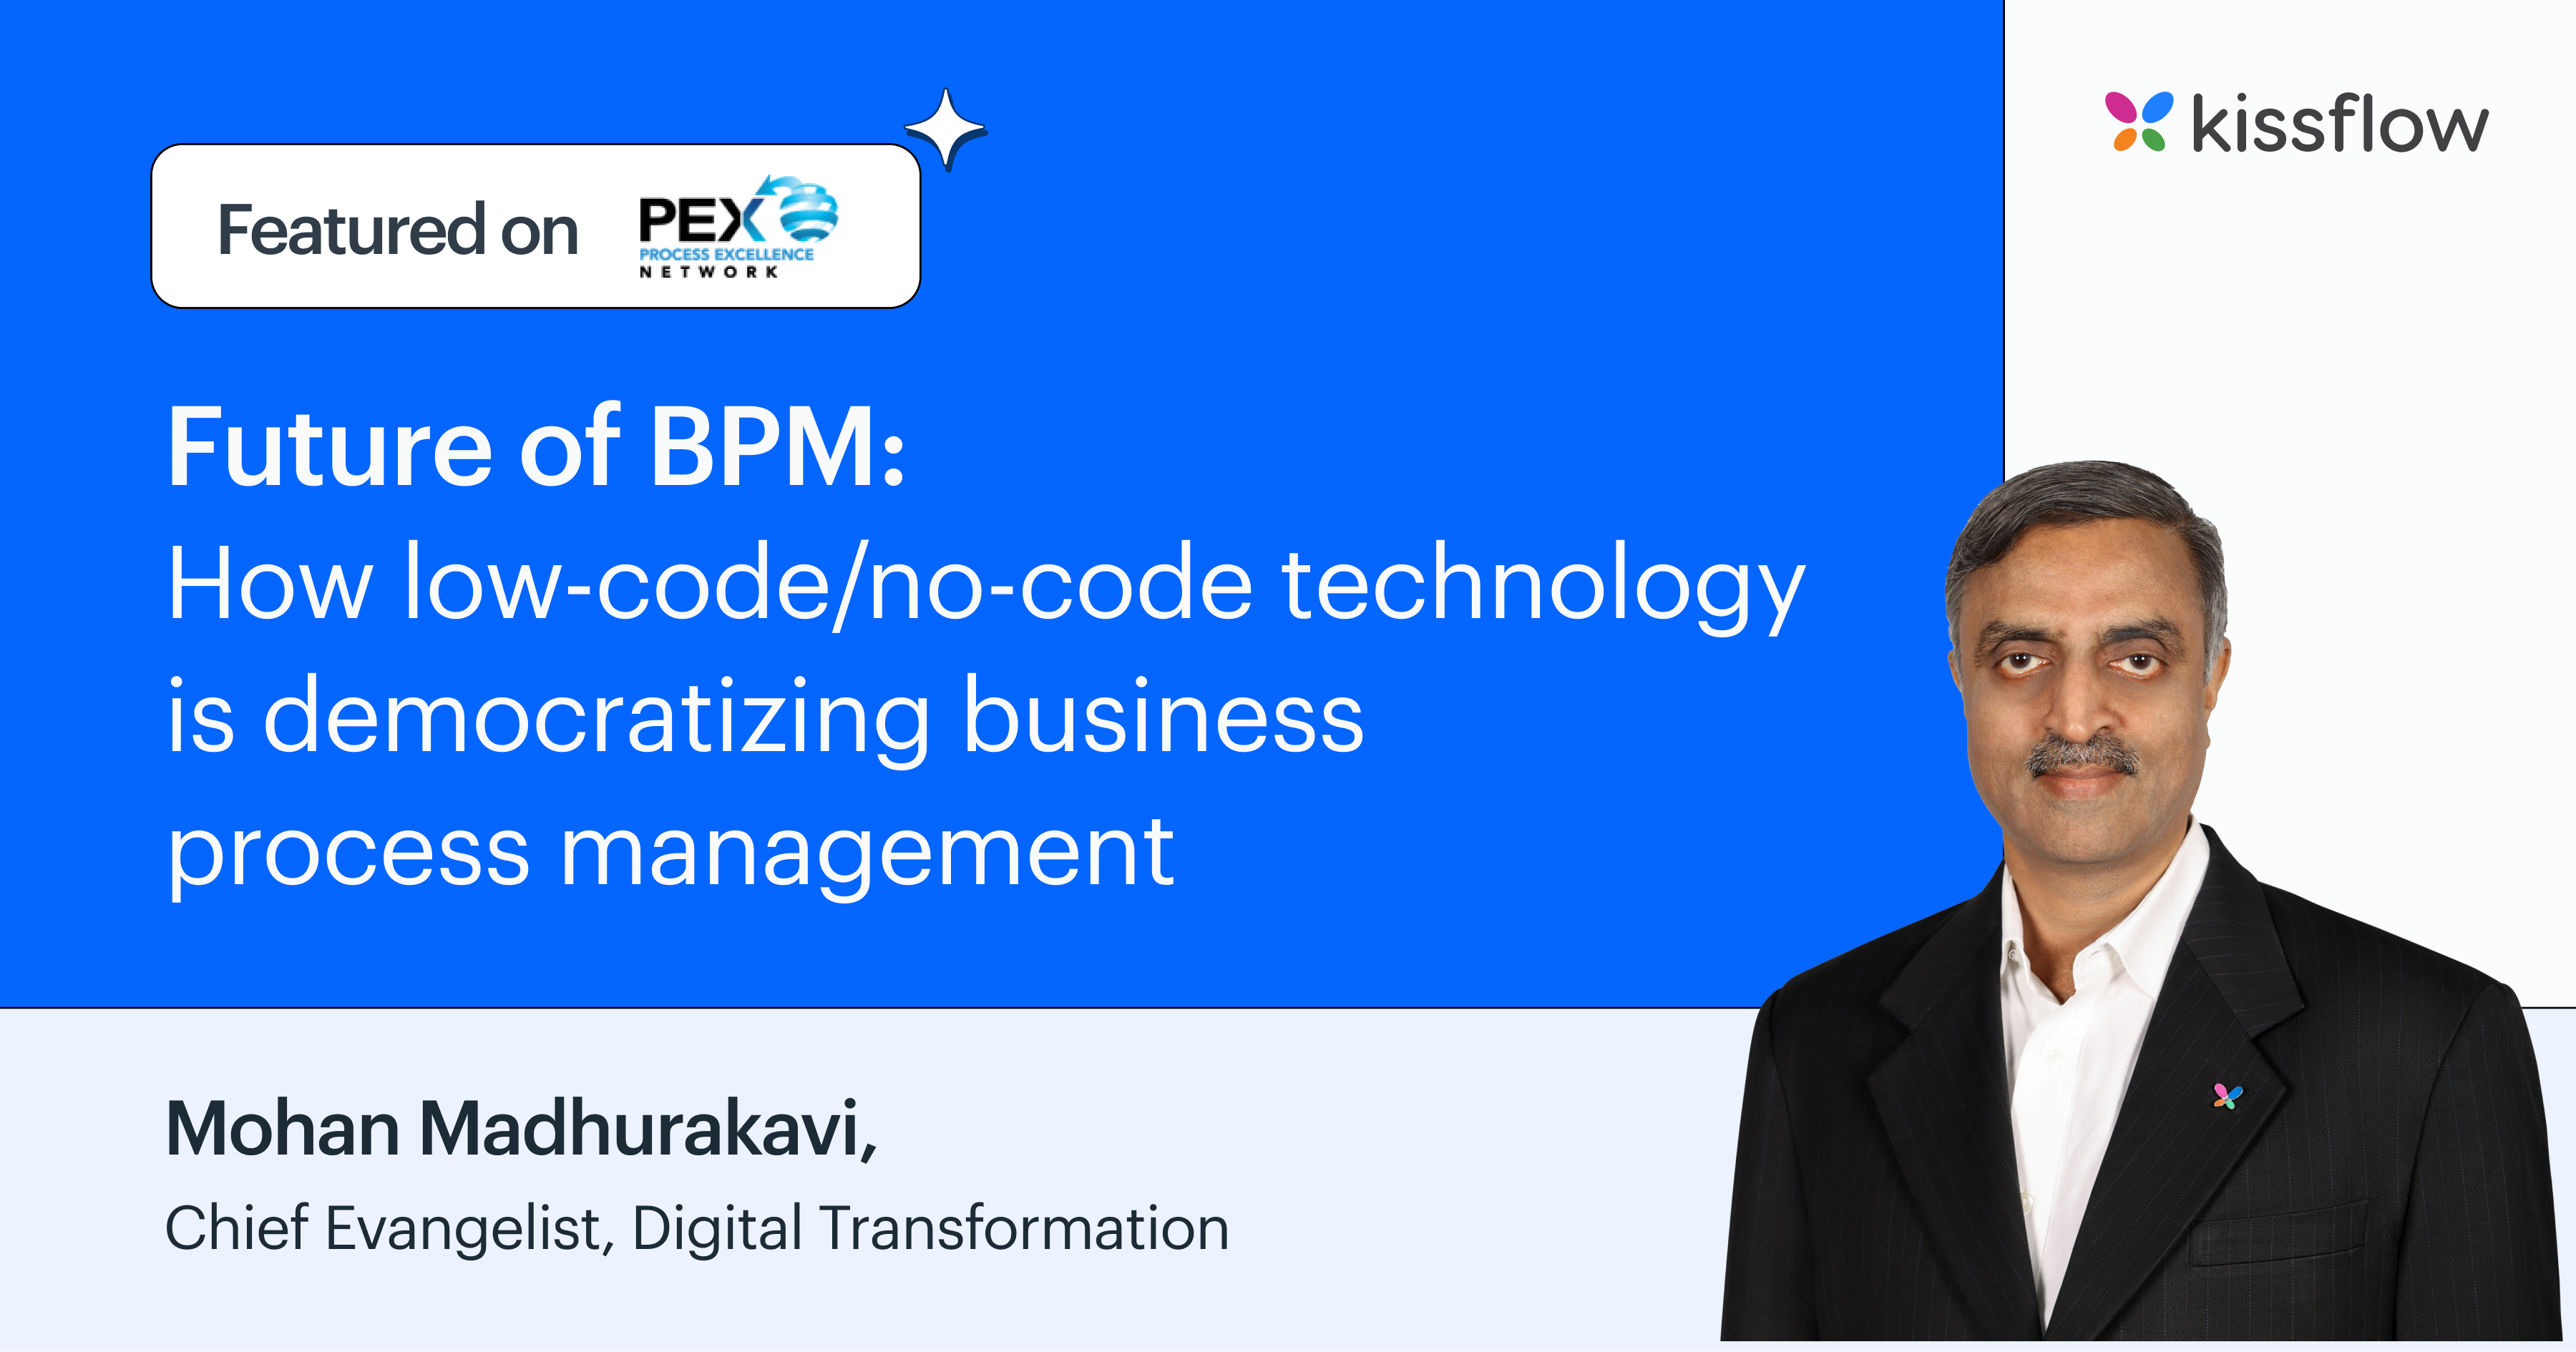 Future of BPM: How low-code/no-code technology is democratizing business process management 